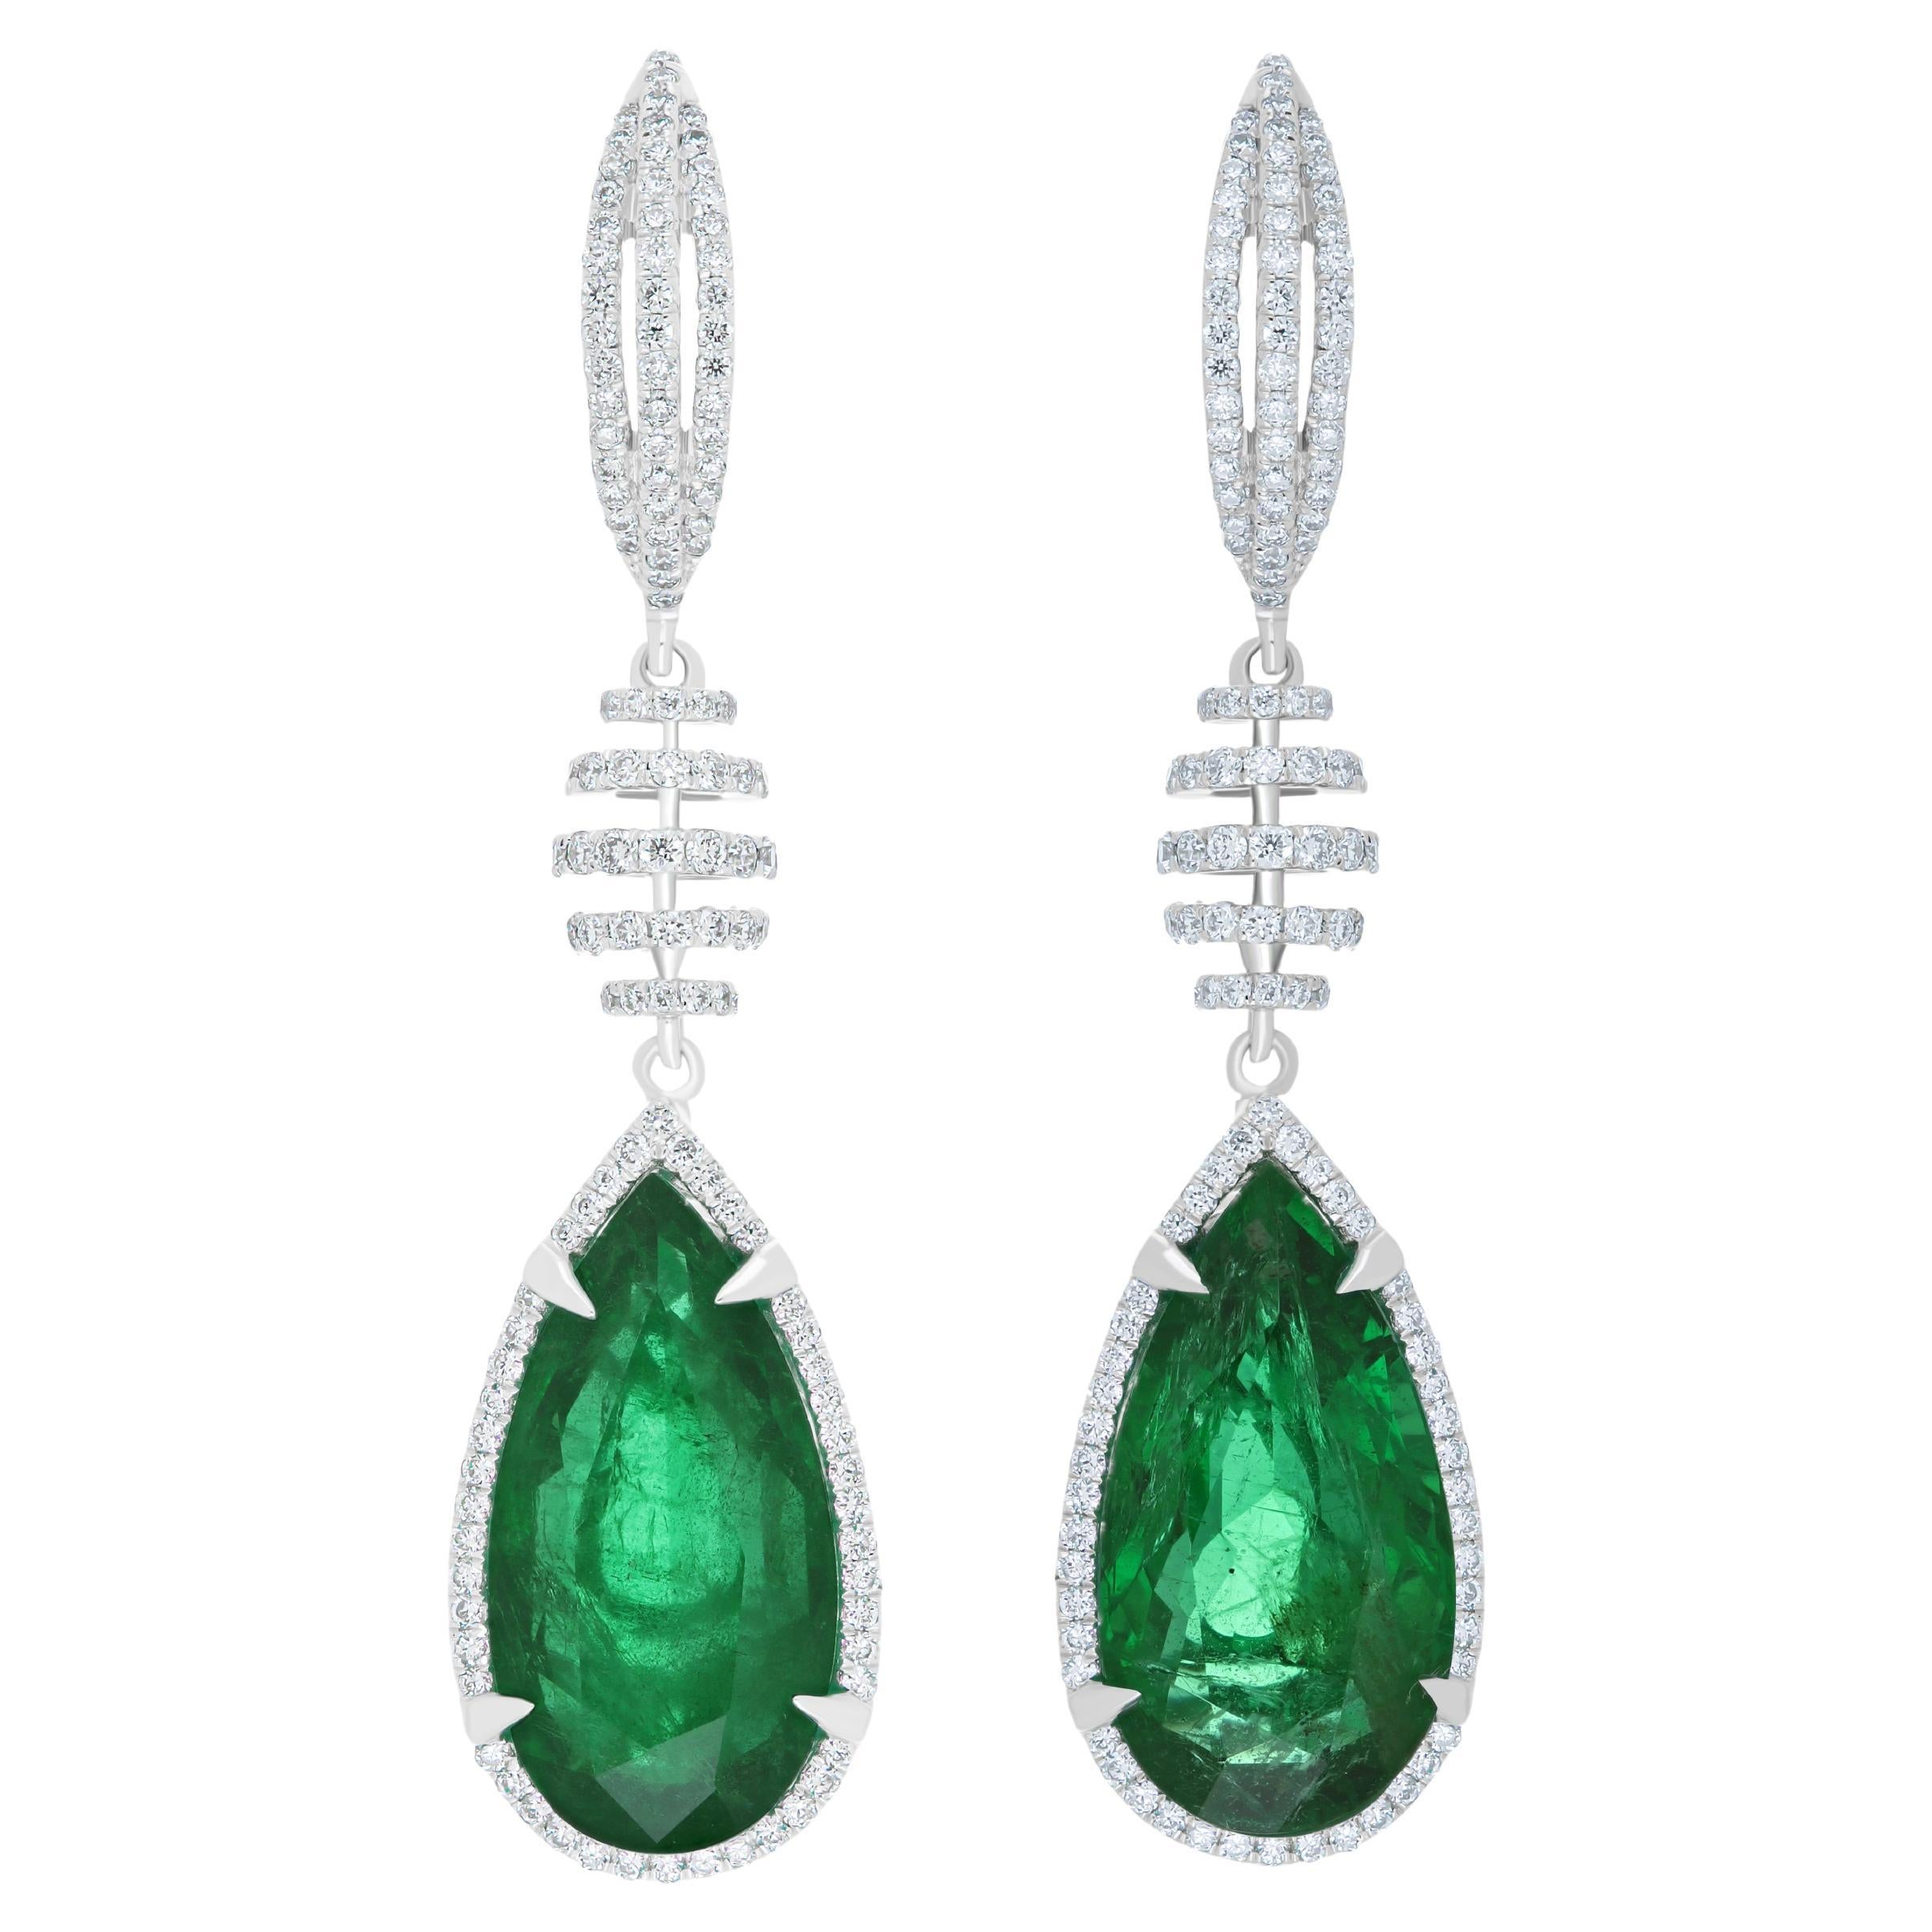 Emerald and Diamond Earring in 18k White Gold for Charismas Party Wear Earring 